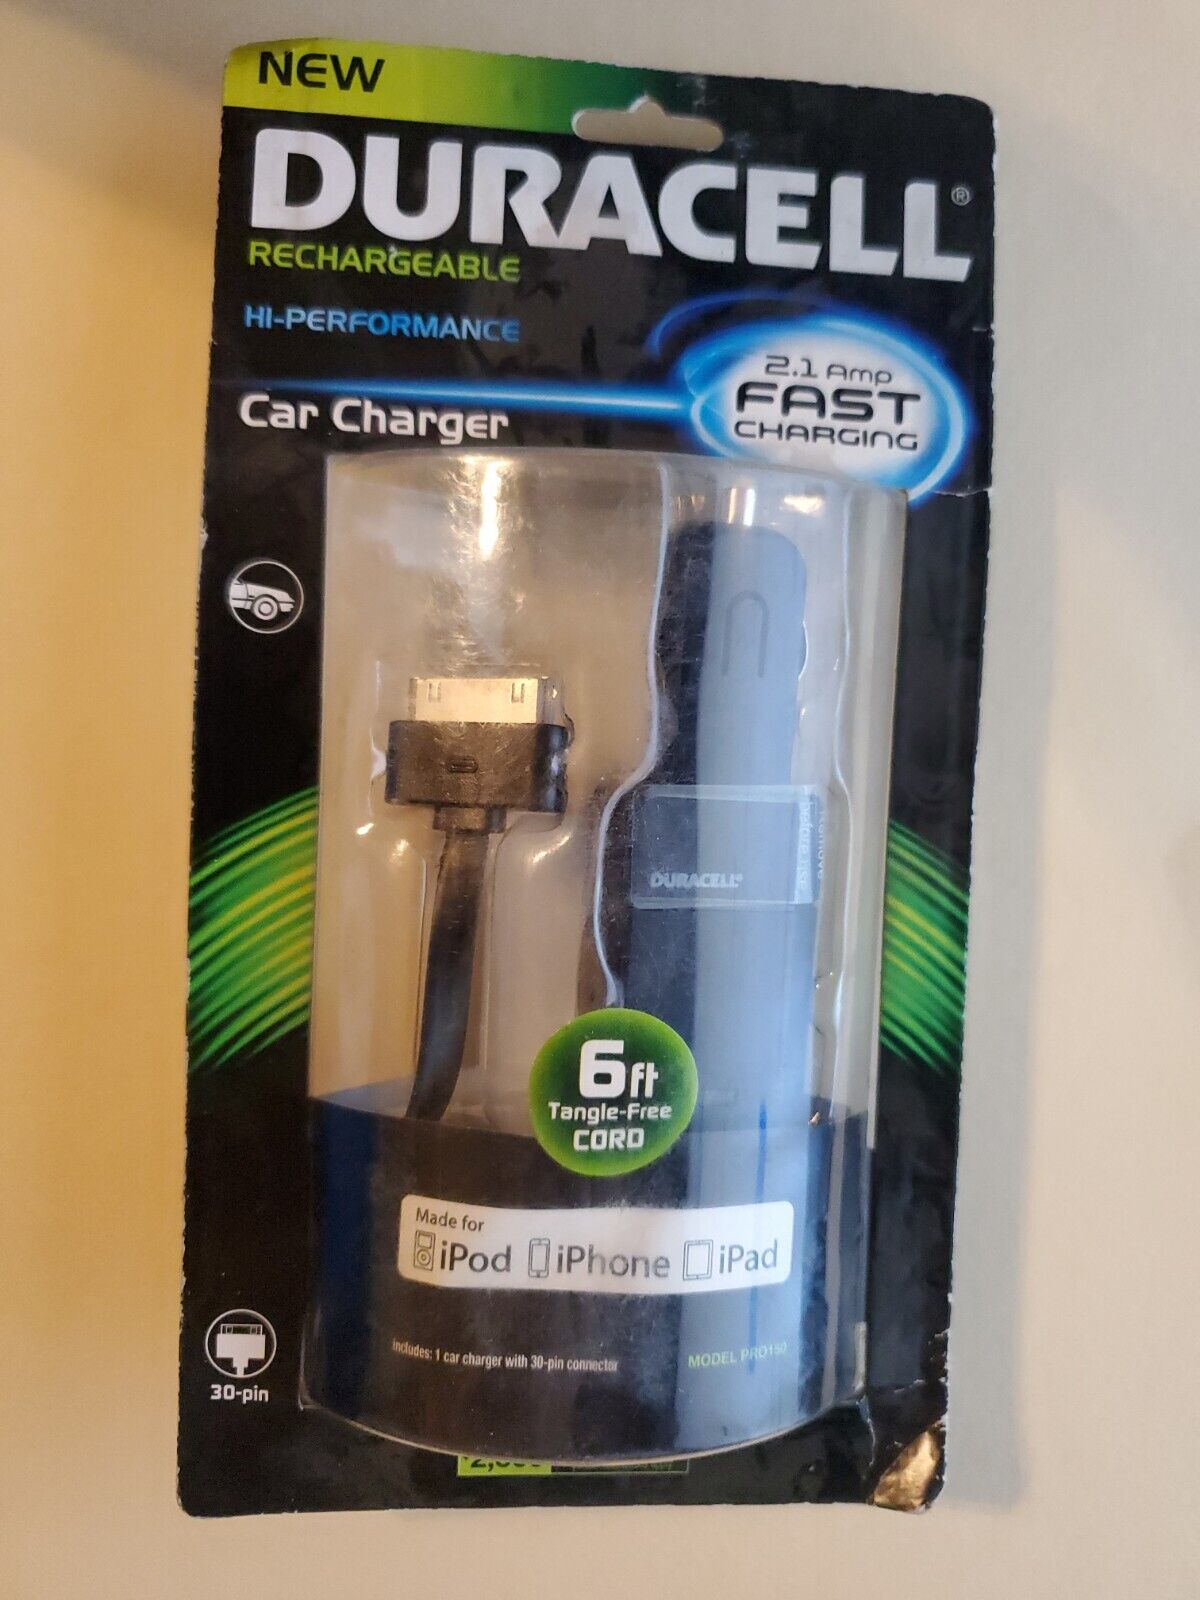 Duracell Cell Phone 2.1 Amp Fast Car Charger iPhone iPad iPod Touch Nano 30 Pin